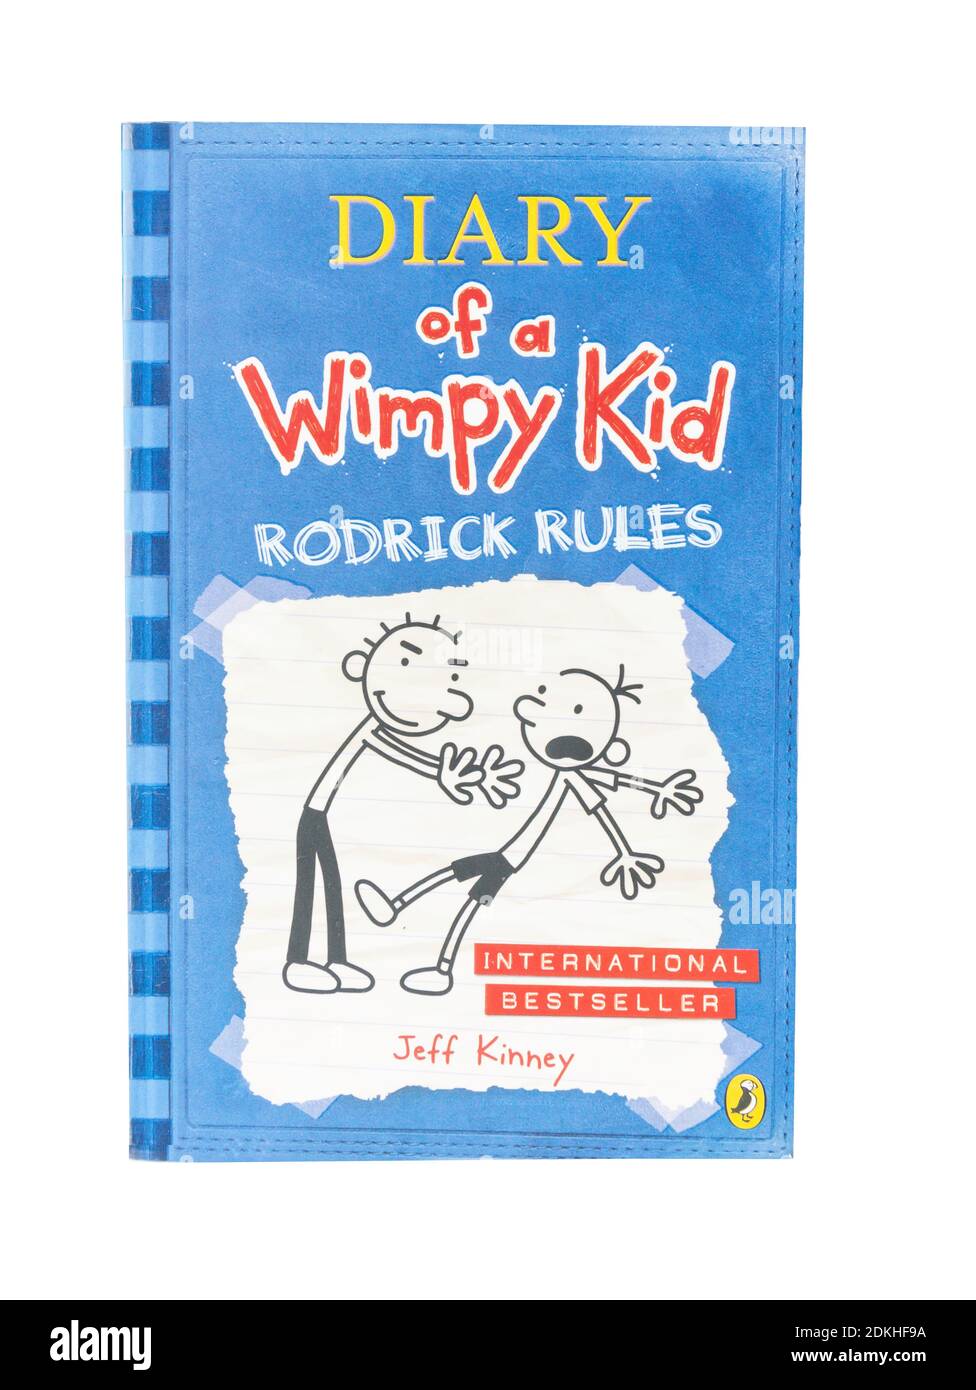 Diary of a Wimpy Kid by Jeff Kinney, Greater London, England, United Kingdom Stock Photo